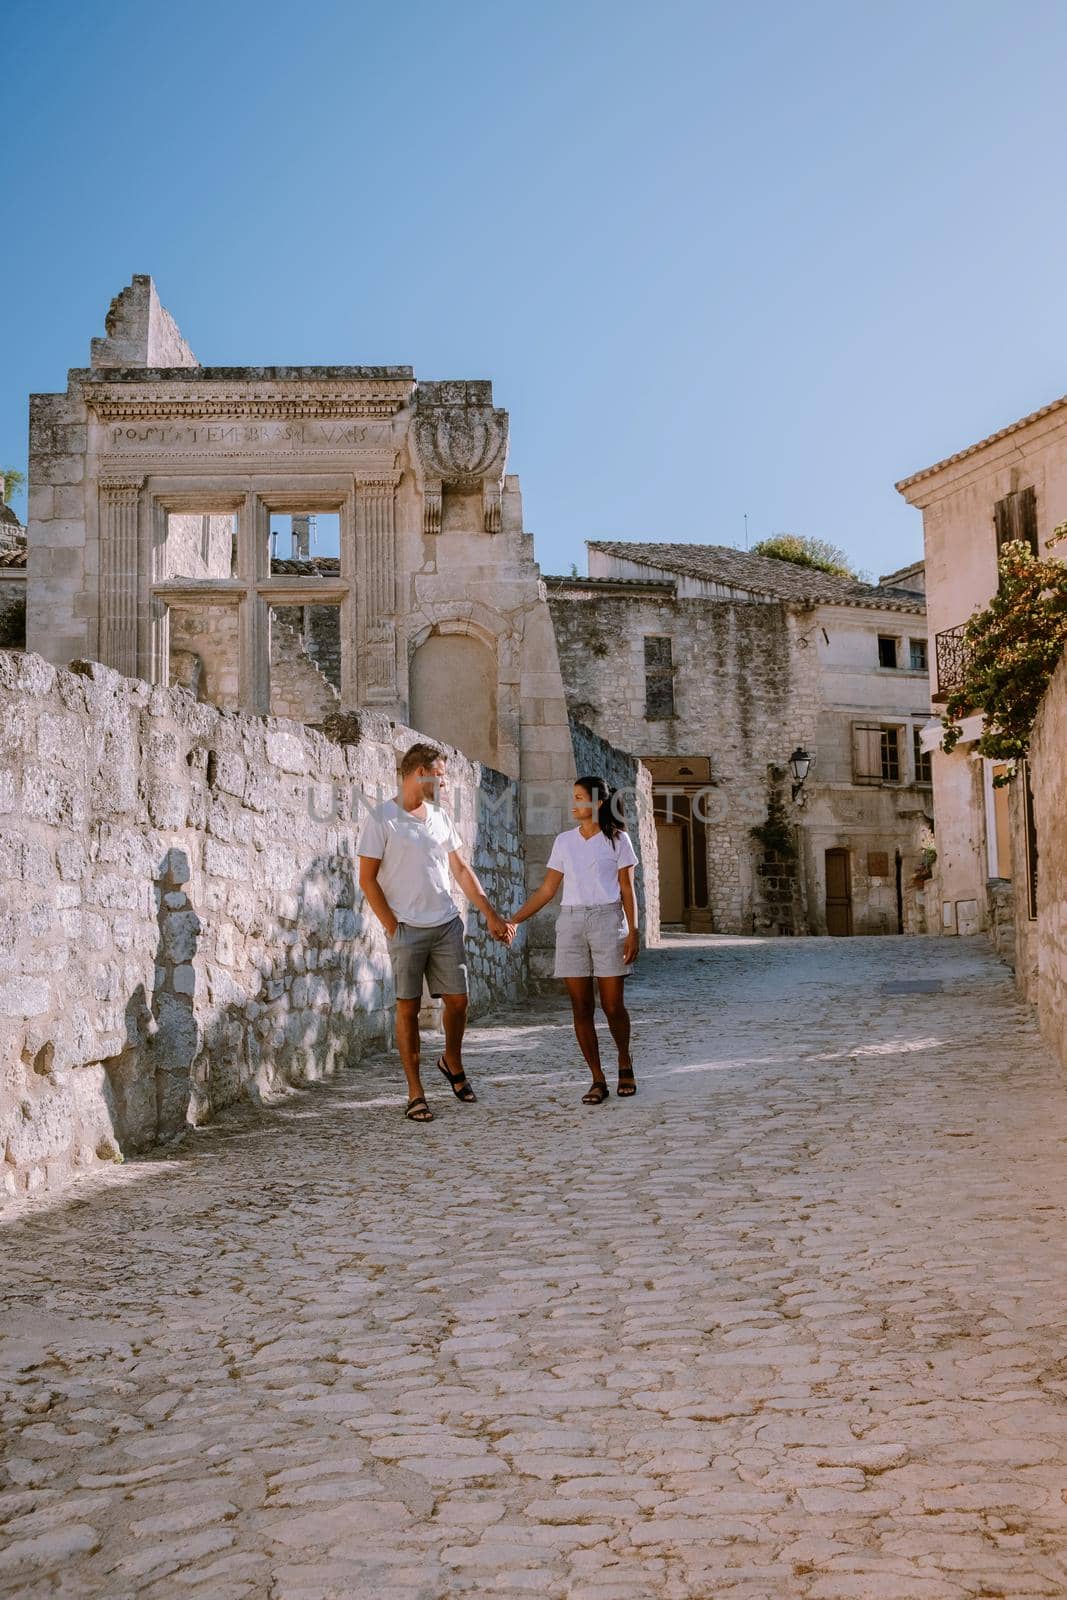 couple visit the town of Les Baux de Provence France, old historical village build on a hill in the Provence, Les Baux de Provence village on the rock formation and its castle. France, Europe by fokkebok